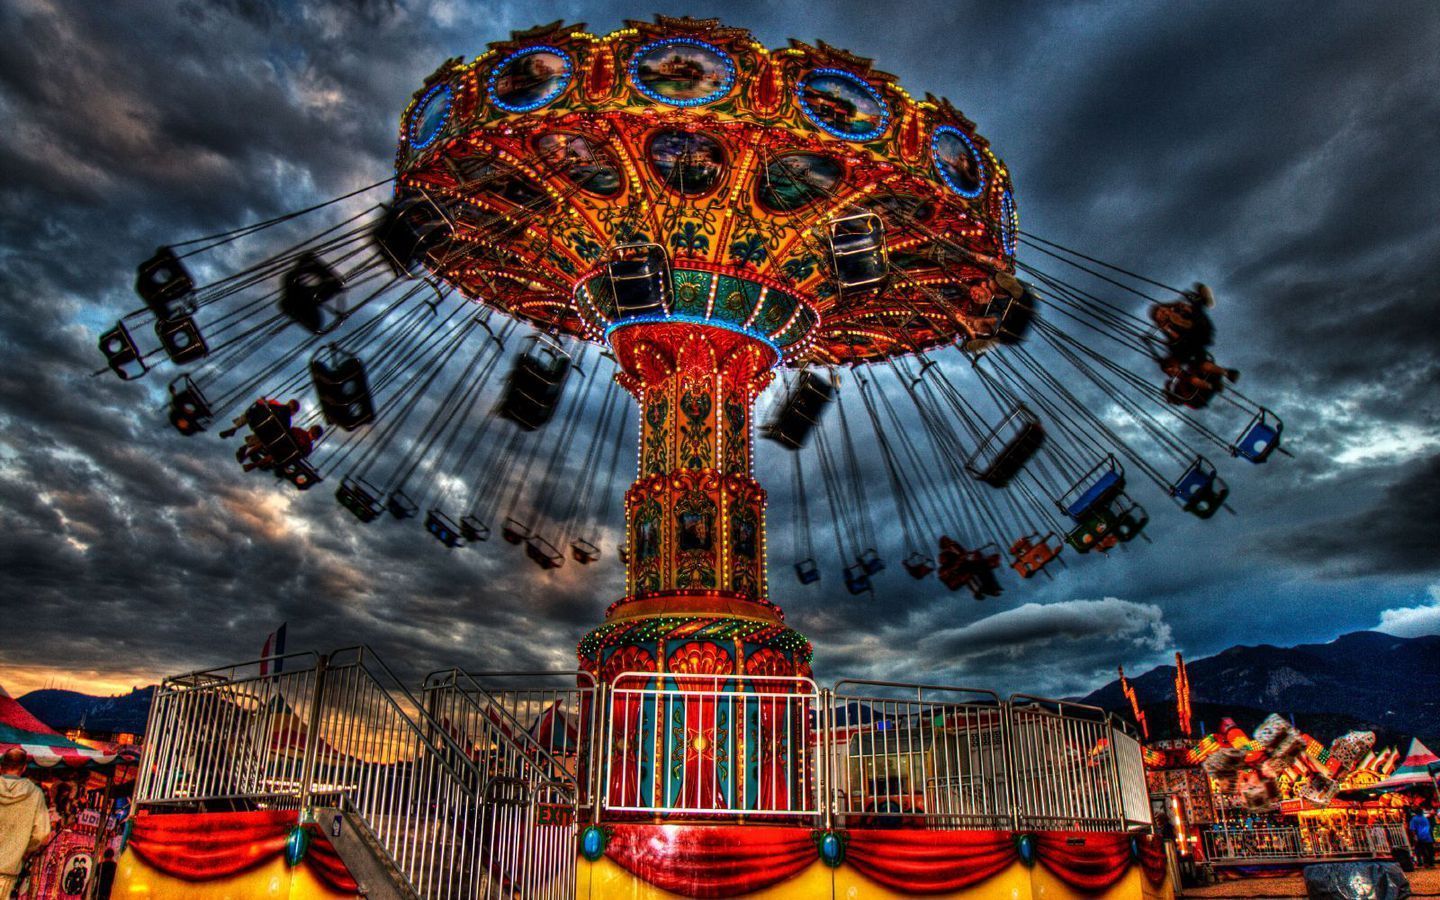 Circus and Carnivals Wallpaper: Going to the Carnival. Carnival rides, Carnival, Carnival image